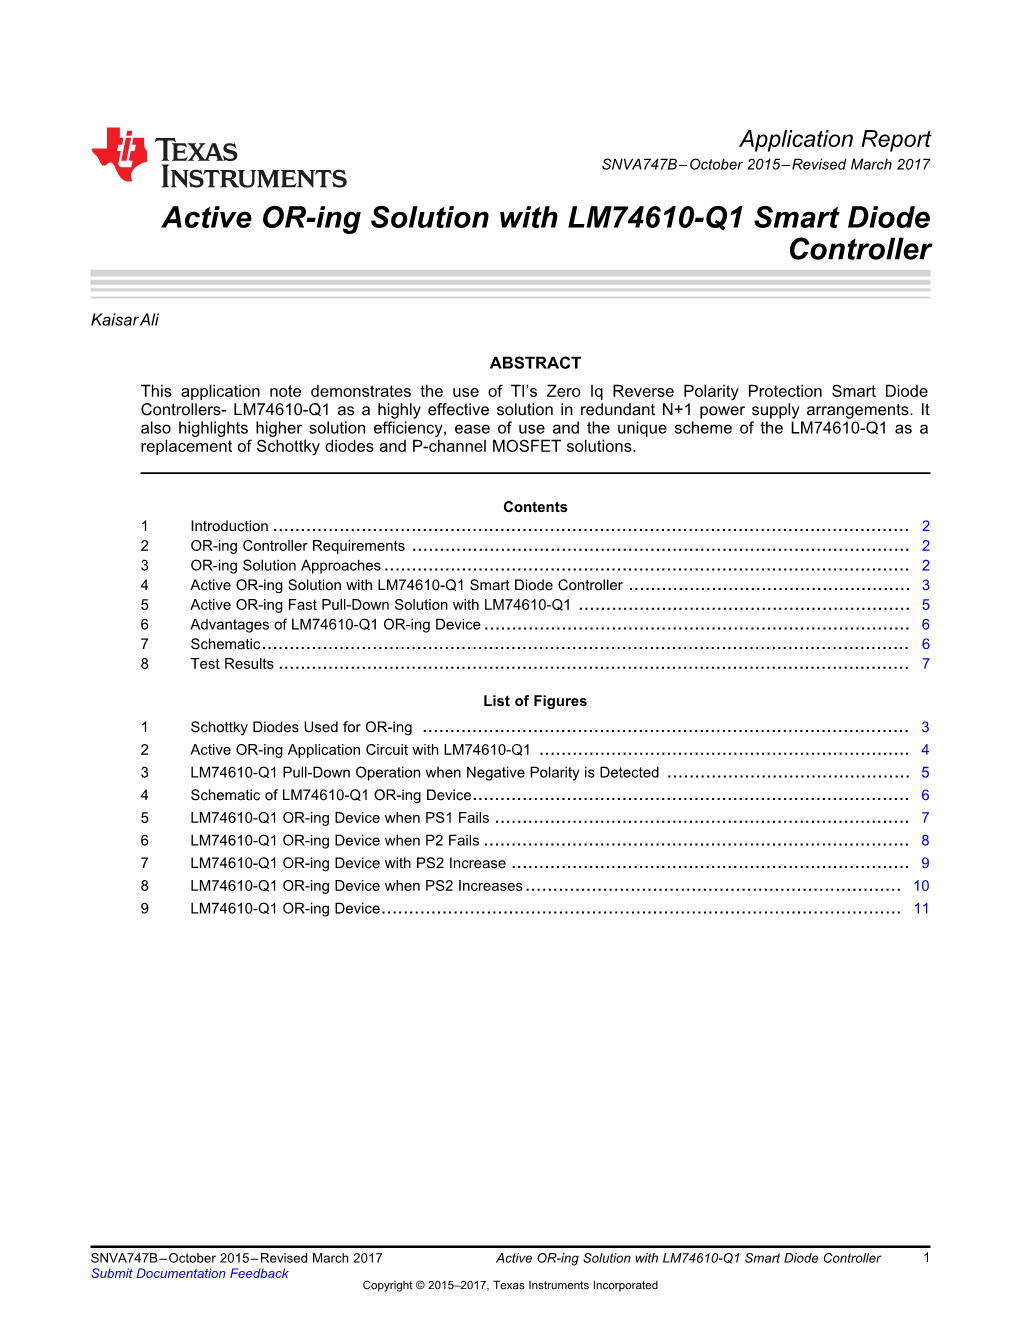 Active OR-Ing Solution with LM74610 Smart Diode Controller (Rev. B)